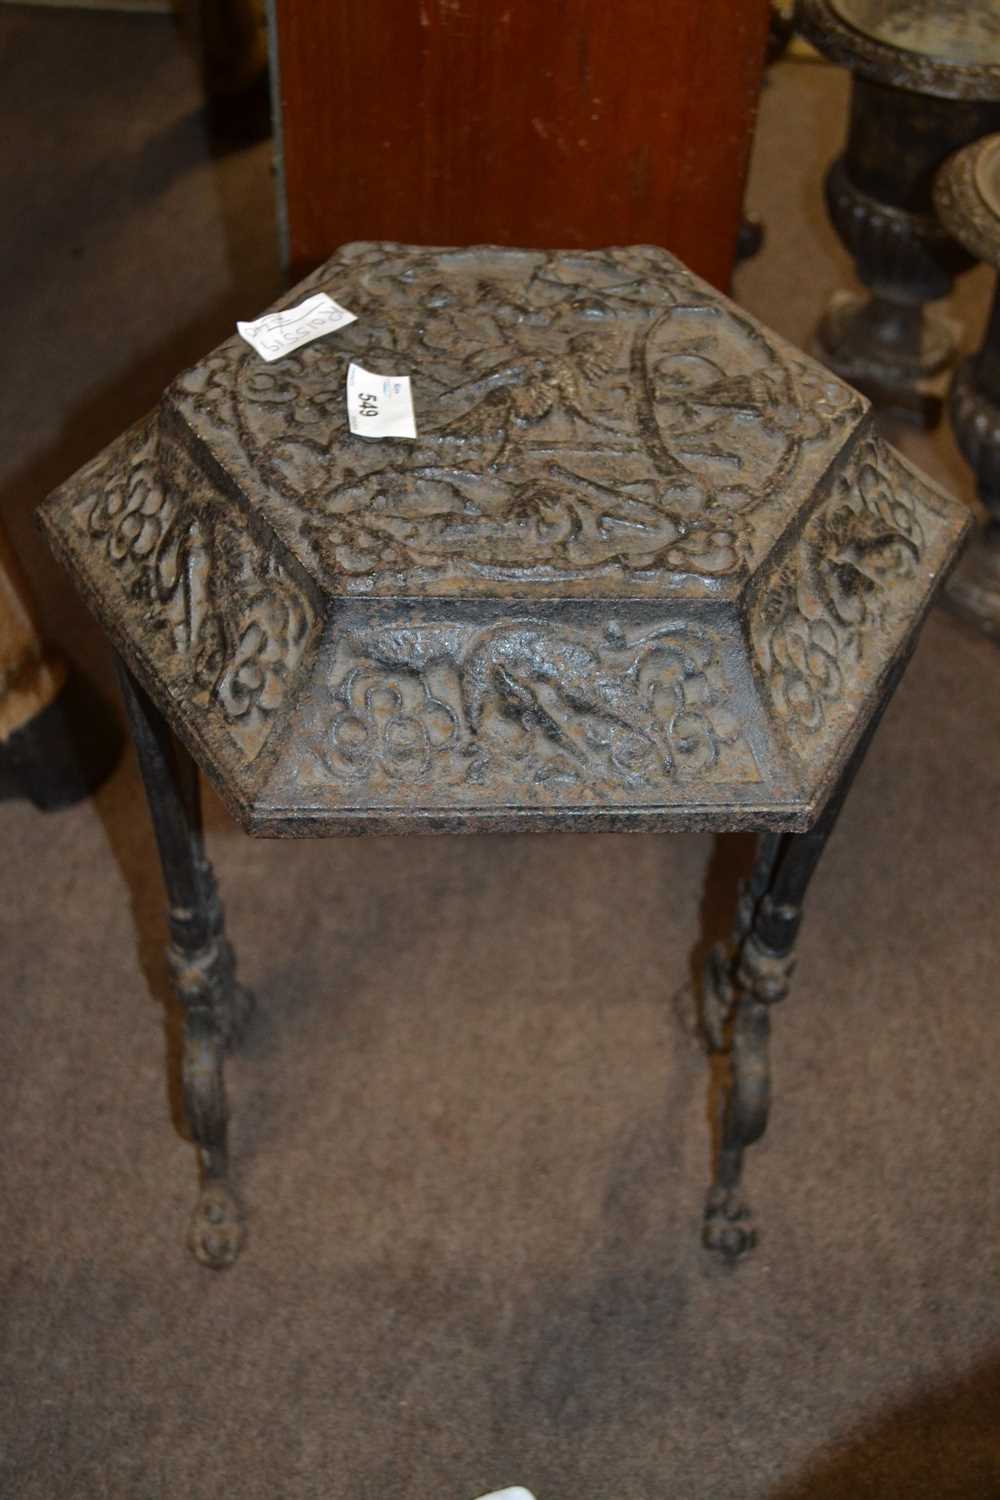 An unusual Victorian aesthetic style iron cover or stool, the top decorated in chinoiserie type